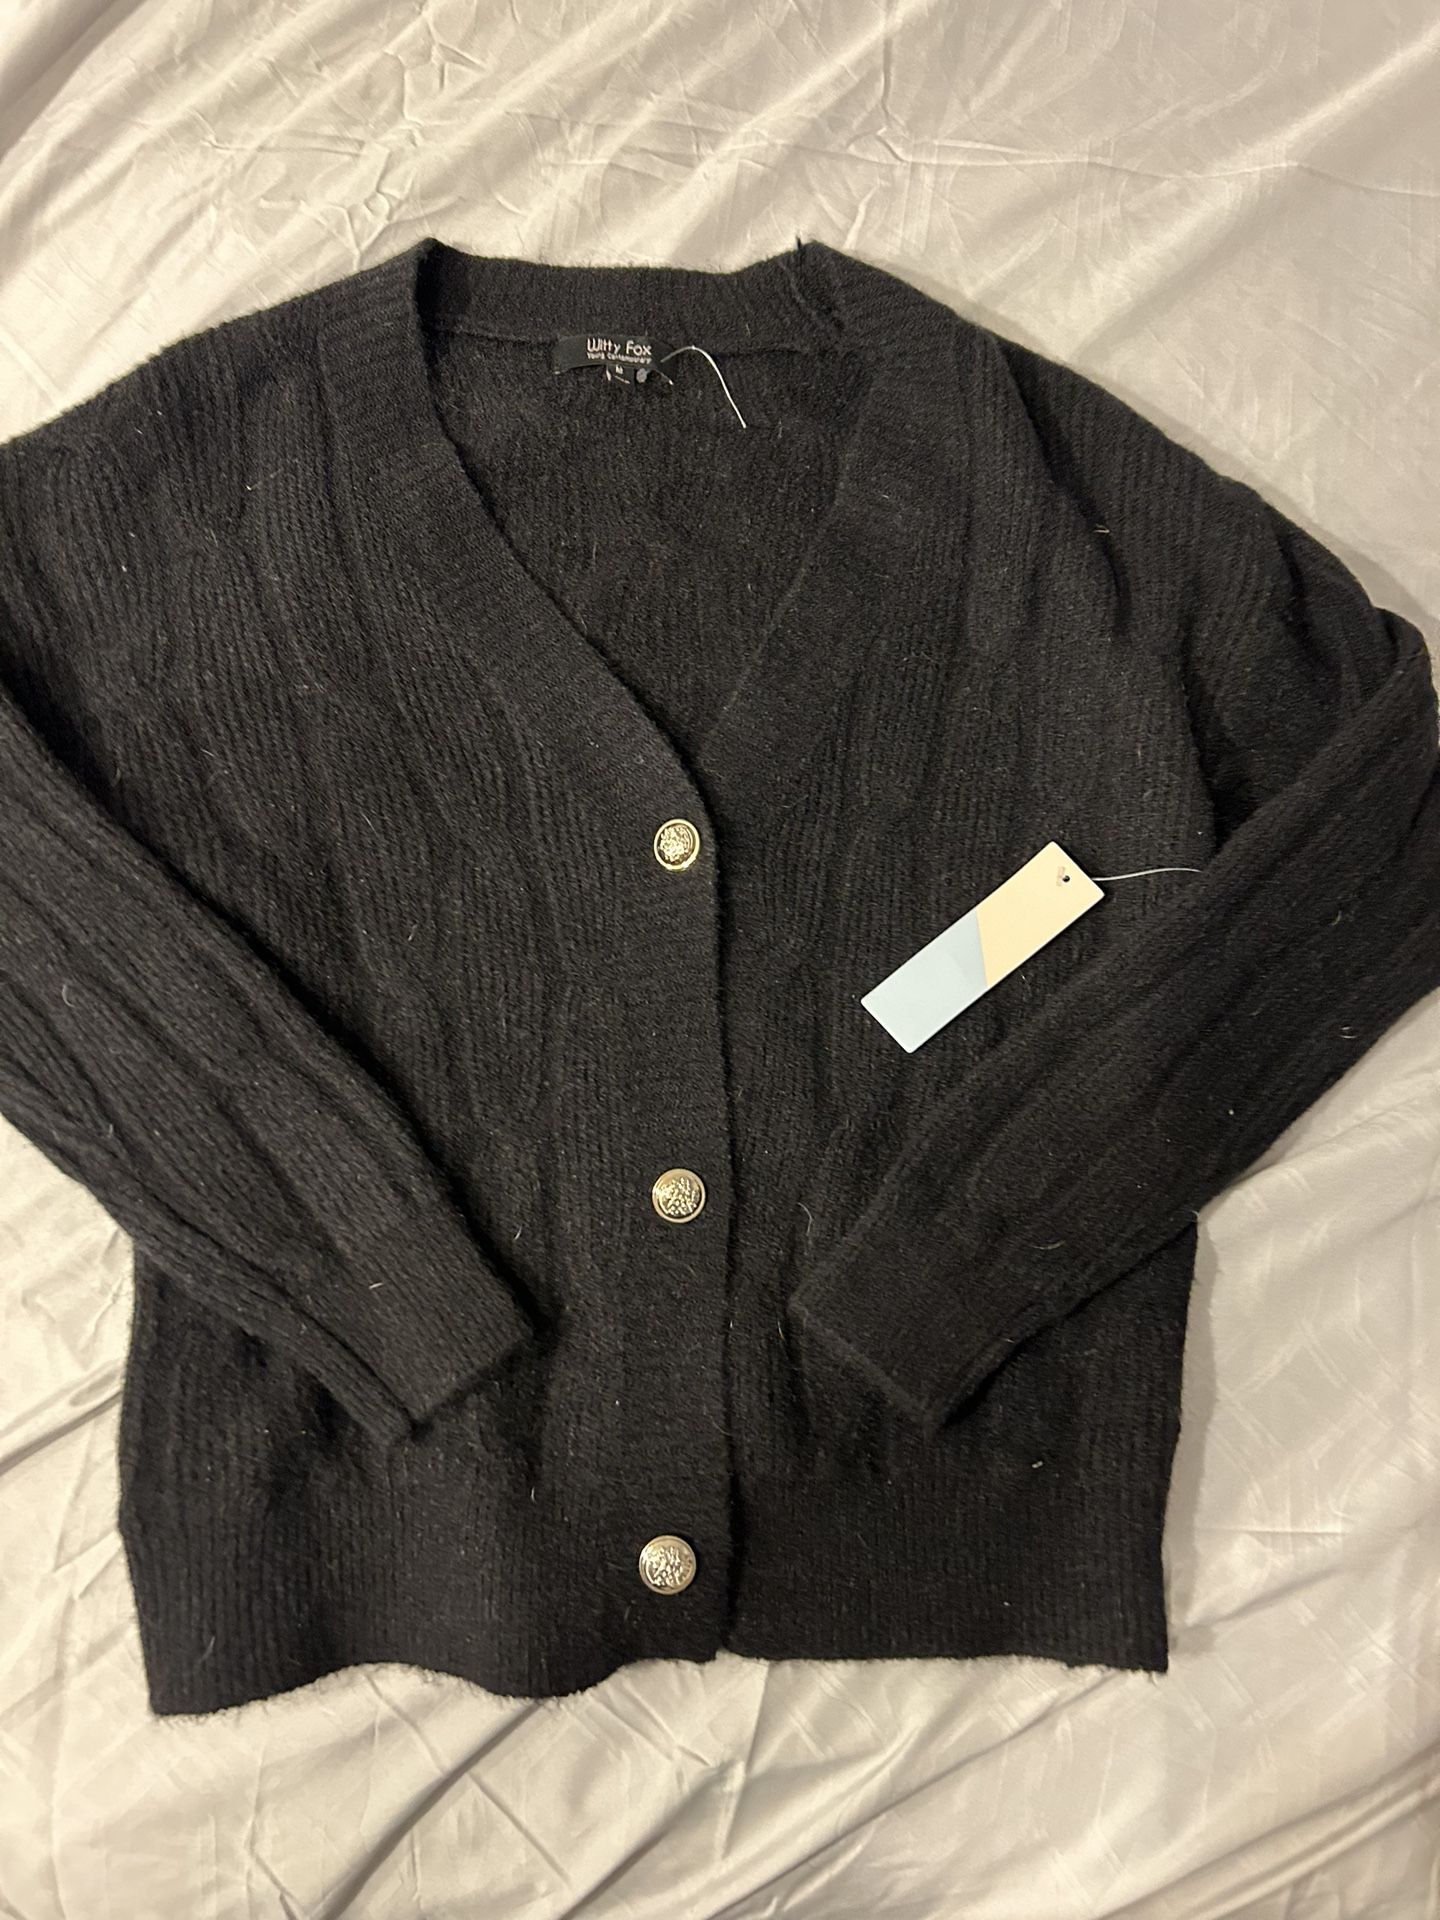 NWT Witty Fox Young Contemporary Black Cardigan 